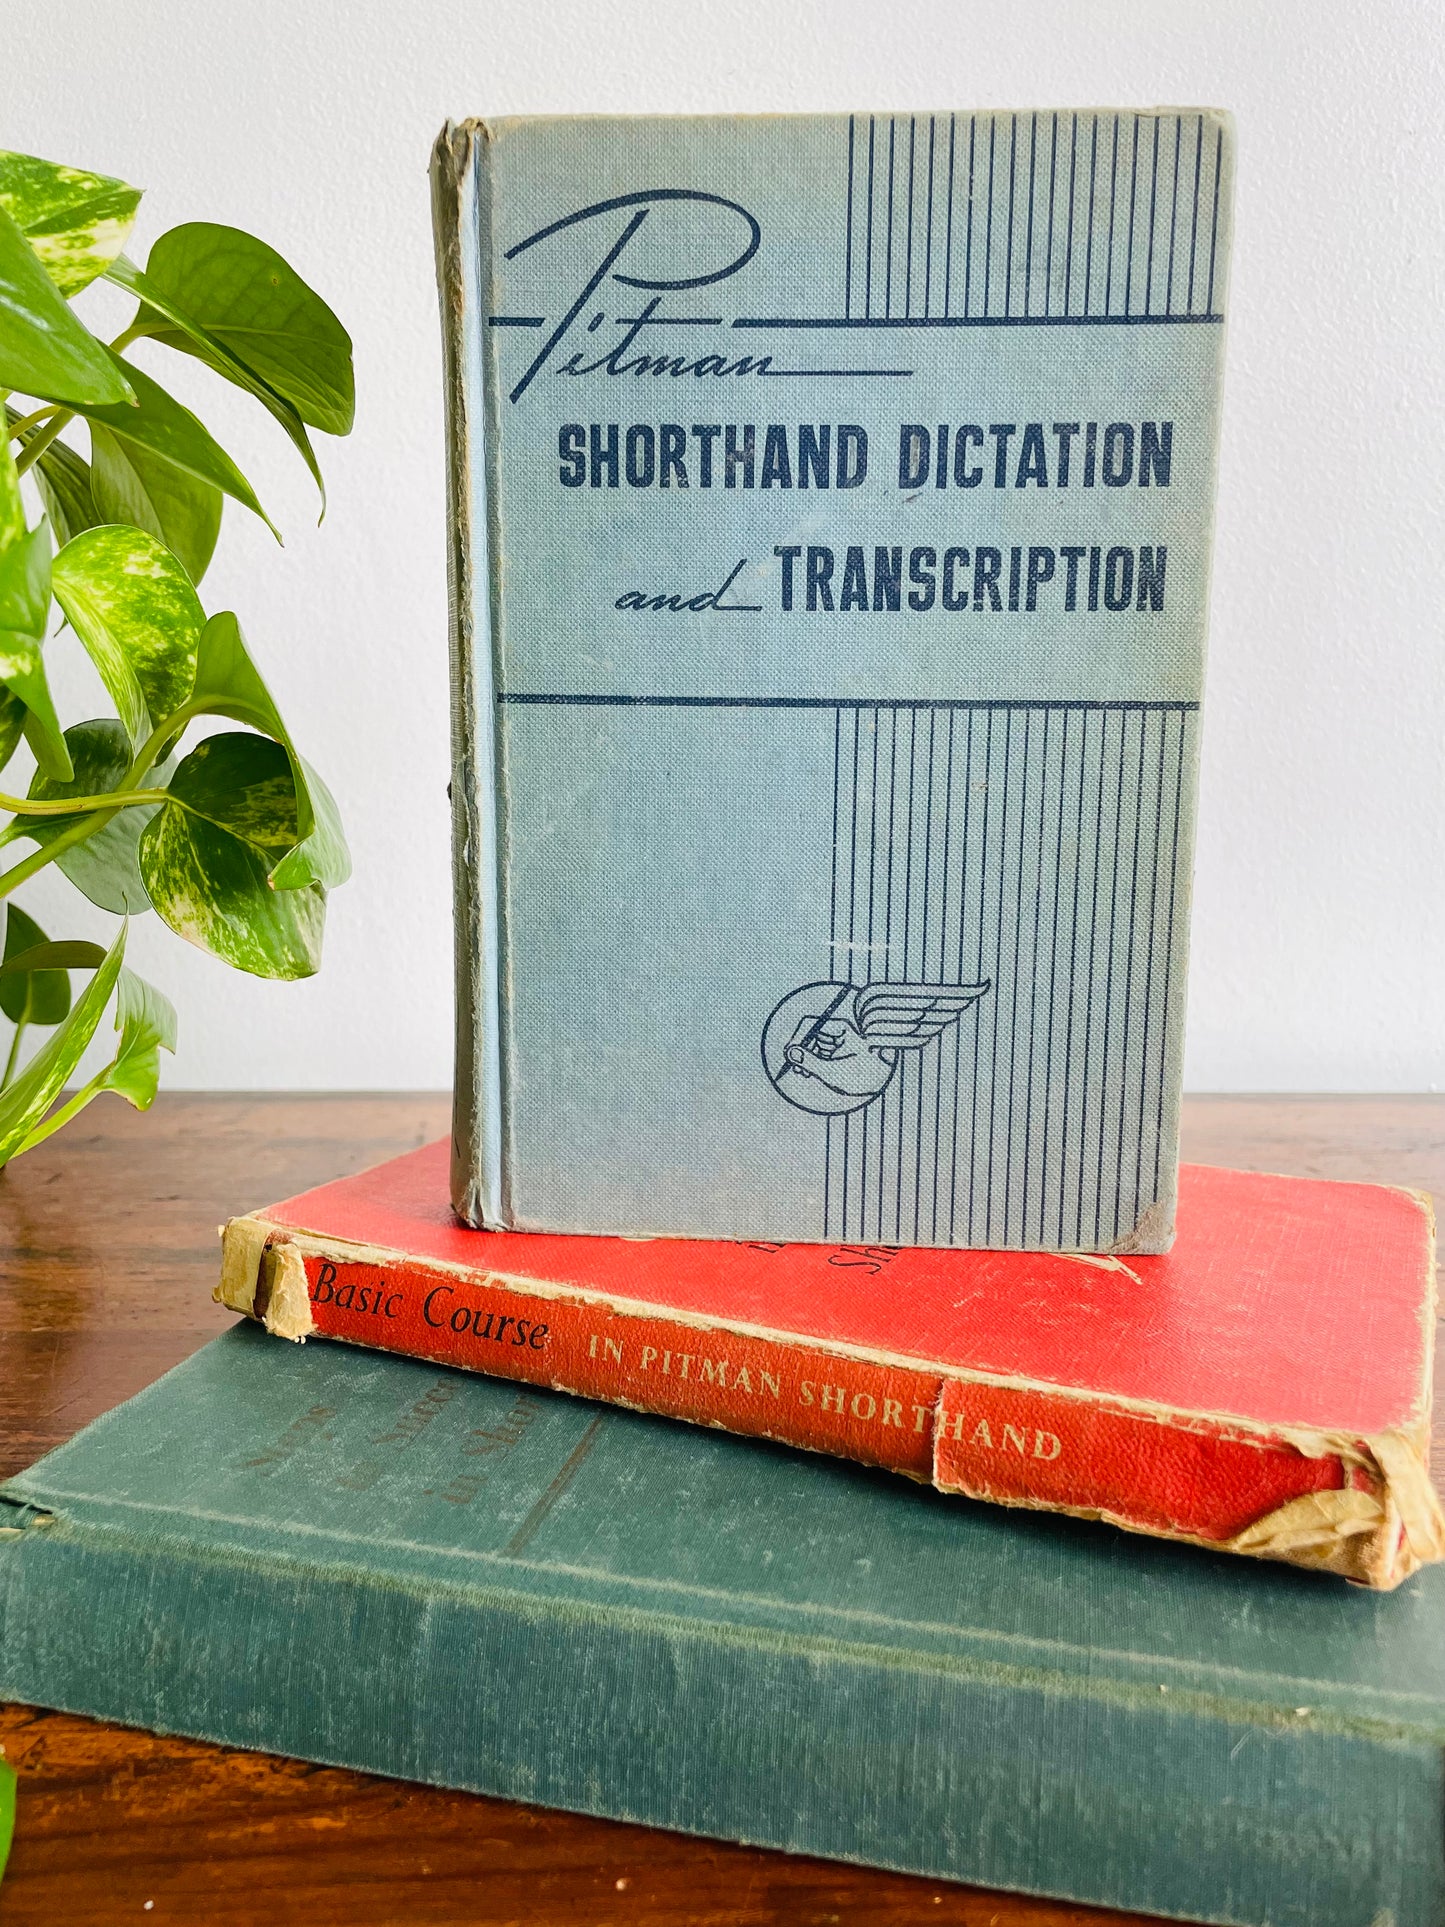 Shorthand Clothbound Hardcover Book Bundle - Set of 3 - Pitman Shorthand Dictation & Transcription, New Basic Course in Pitman Shorthand (1962), & Steps to Success in Shorthand Book II (1948)